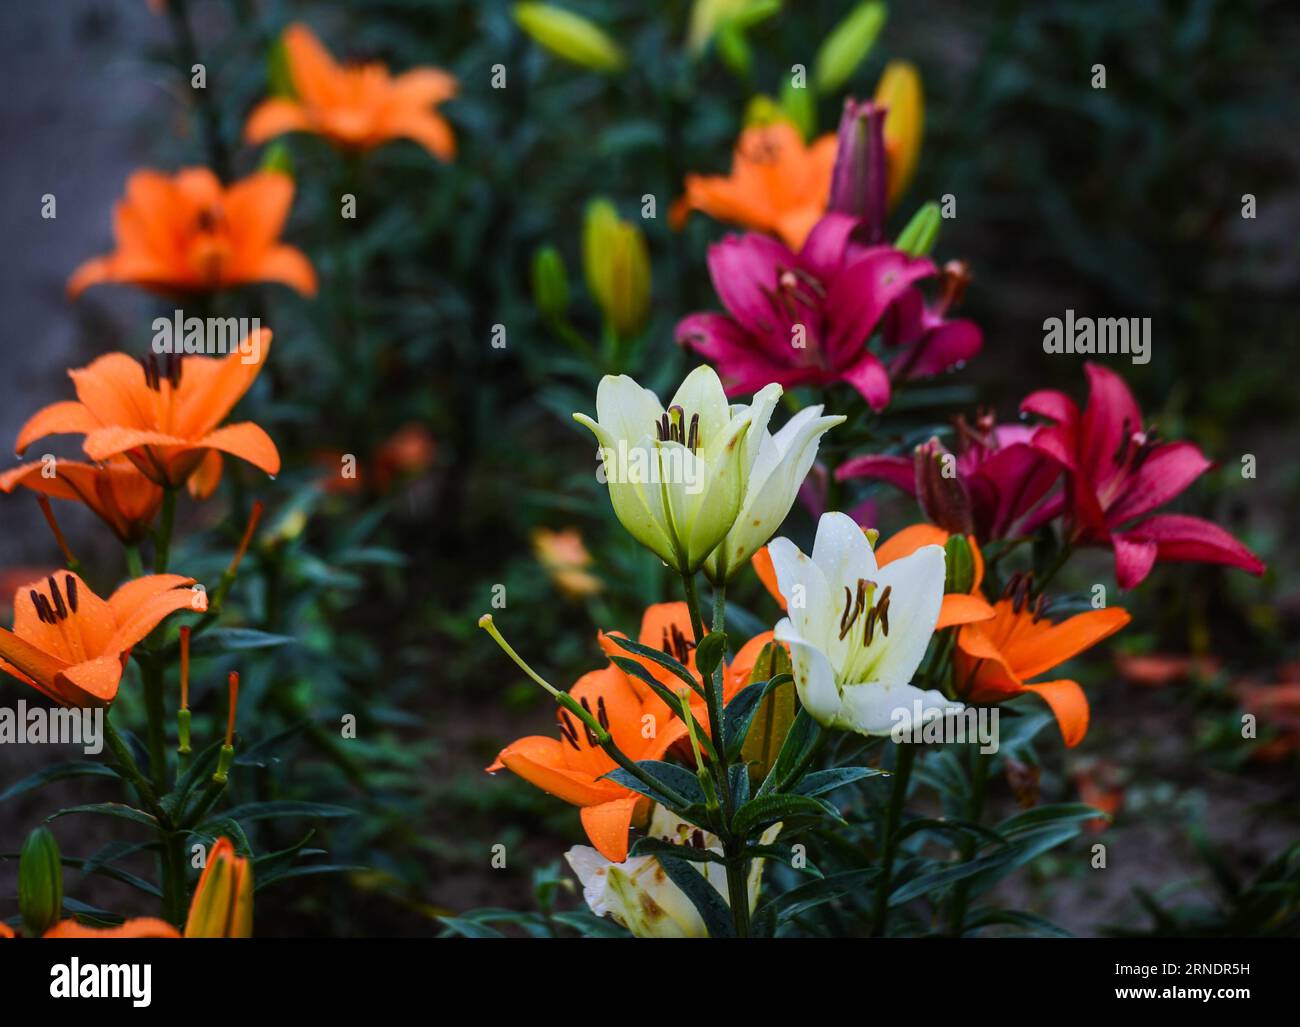 (160528) -- TONGLU, May 28, 2016 -- The lilies are seen in Fenshui Township of Tonglu County, east China s Zhejiang Province, May 28, 2016. Recenly, lilies in Tonglu county are in full blossom, which attracted many tourists. ) (zhs) CHINA-ZHEJIANG-TONGLU-LILIES (CN) XuxYu PUBLICATIONxNOTxINxCHN   160528 Tonglu May 28 2016 The lilies are Lakes in Fenshui Township of Tonglu County East China S Zhejiang Province May 28 2016 recenly lilies in Tonglu County are in Full Blossom Which attracted MANY tourists zhs China Zhejiang Tonglu lilies CN XuxYu PUBLICATIONxNOTxINxCHN Stock Photo